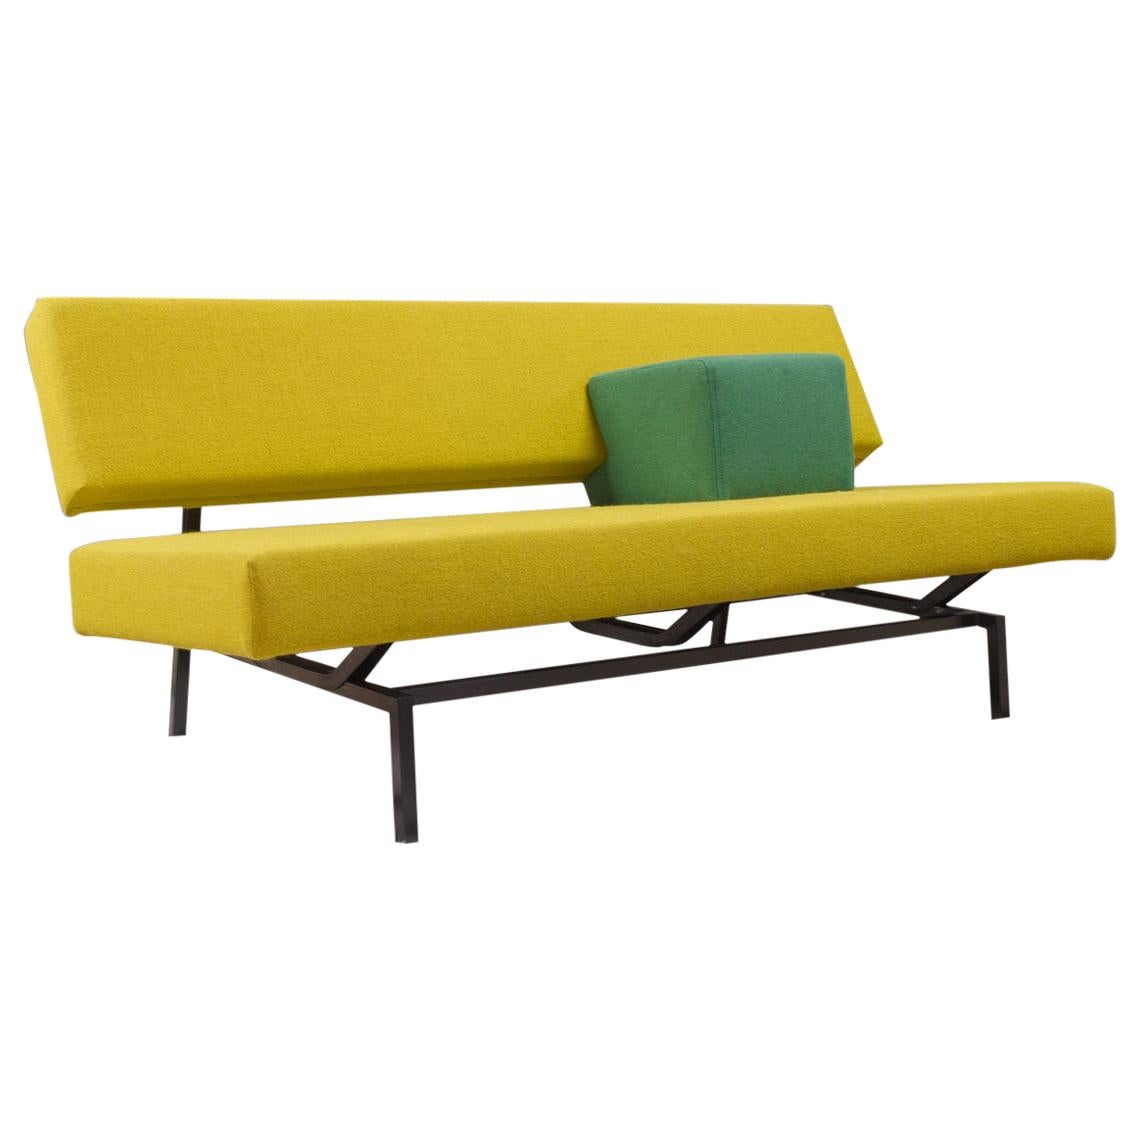 Martin Visser BZ53 Sofa in New Yellow Wool and Black Frame 1970s Spectrum For Sale